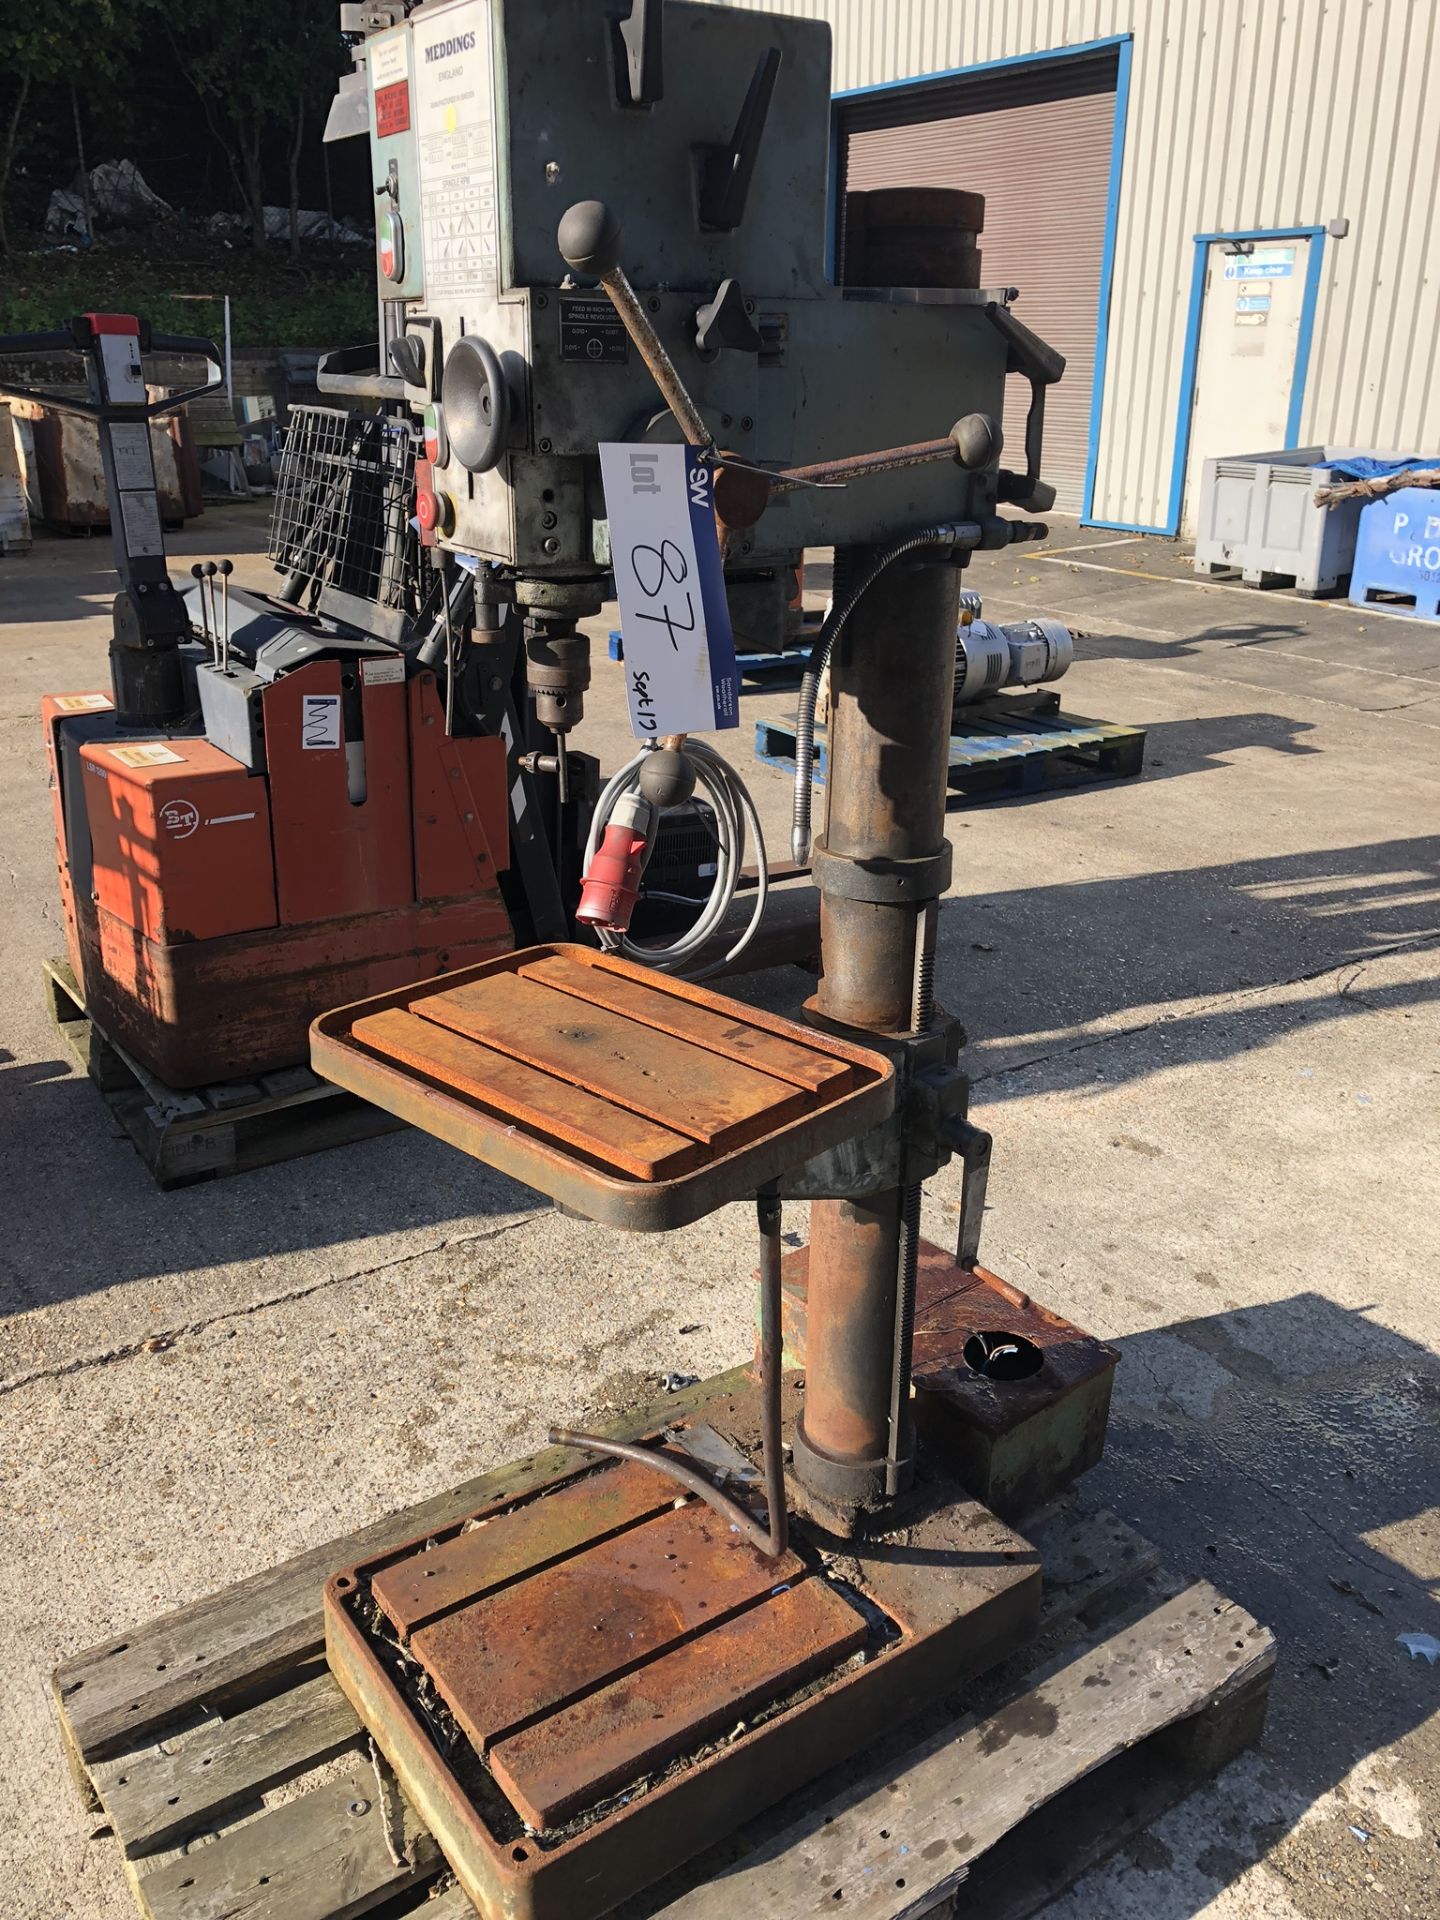 Meddings S32ME Pillar Drill, serial no. 85845, lift out charge - £30